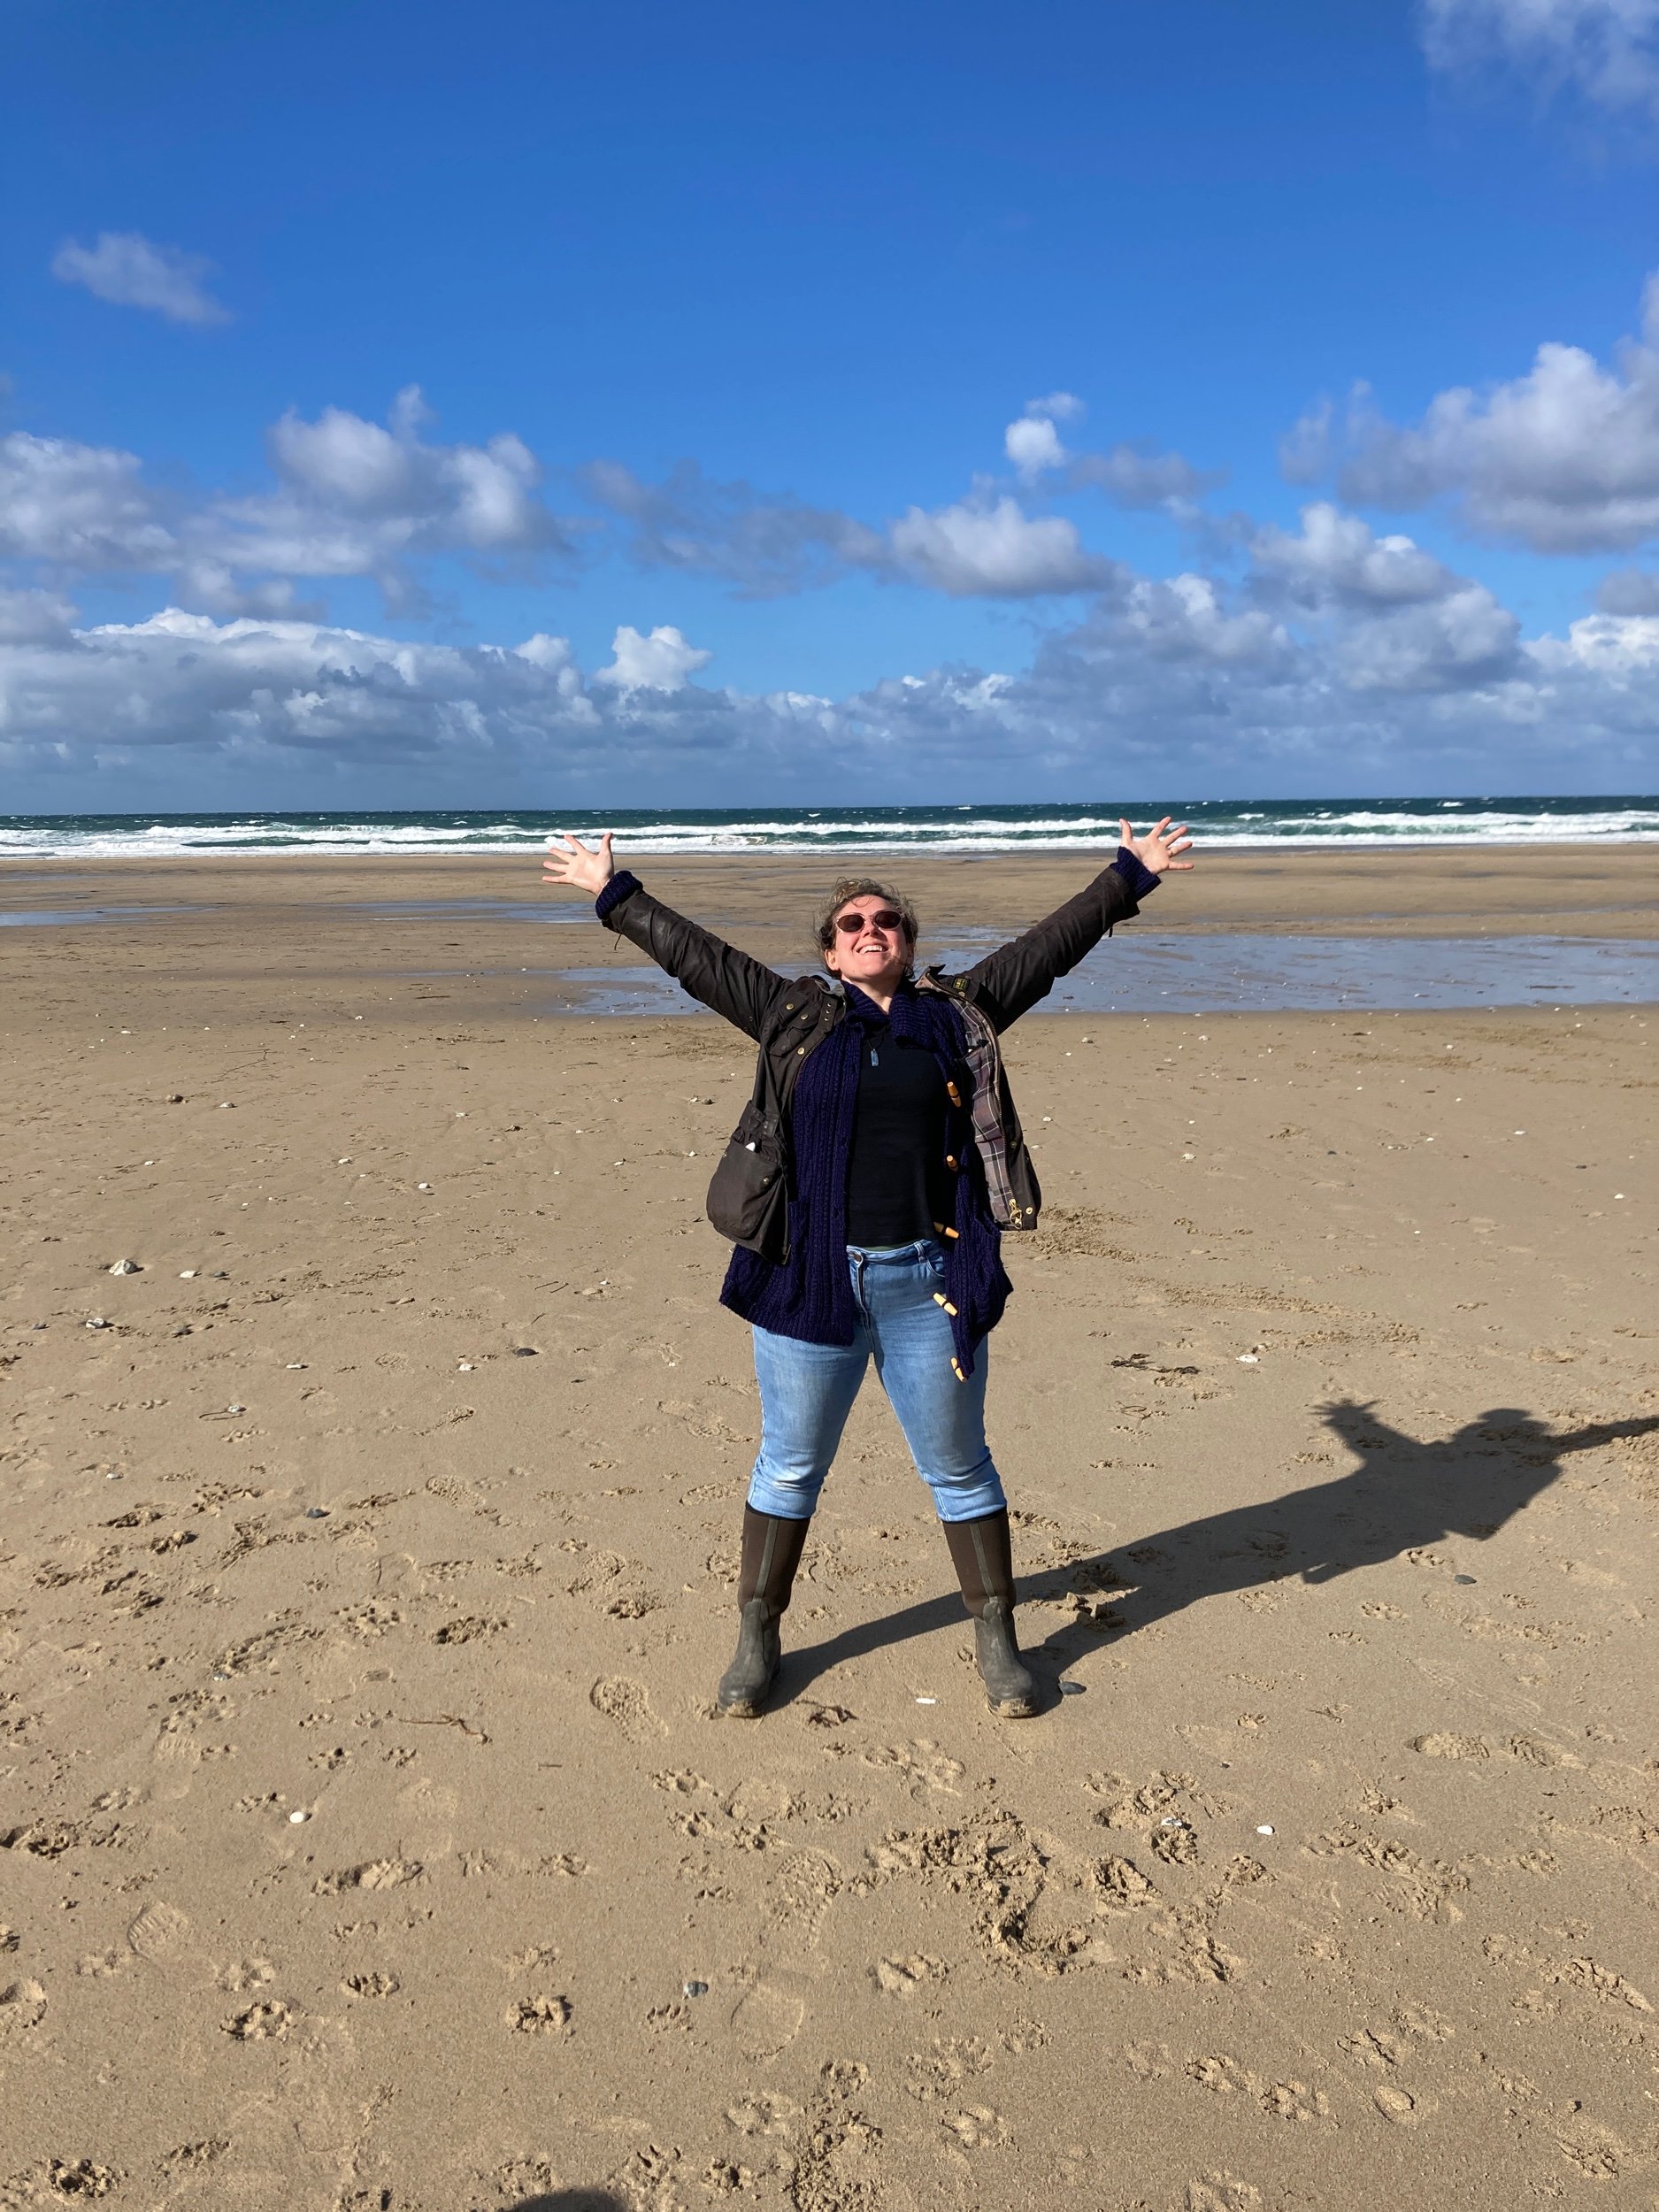 A woman stood on a beach in winter. She is in a celebratory posture, legs apart and grounded in the sand. Her arms are reaching up and out toward the blue sky. In the background the sea lines the landscape and her face apears joyful and happy.